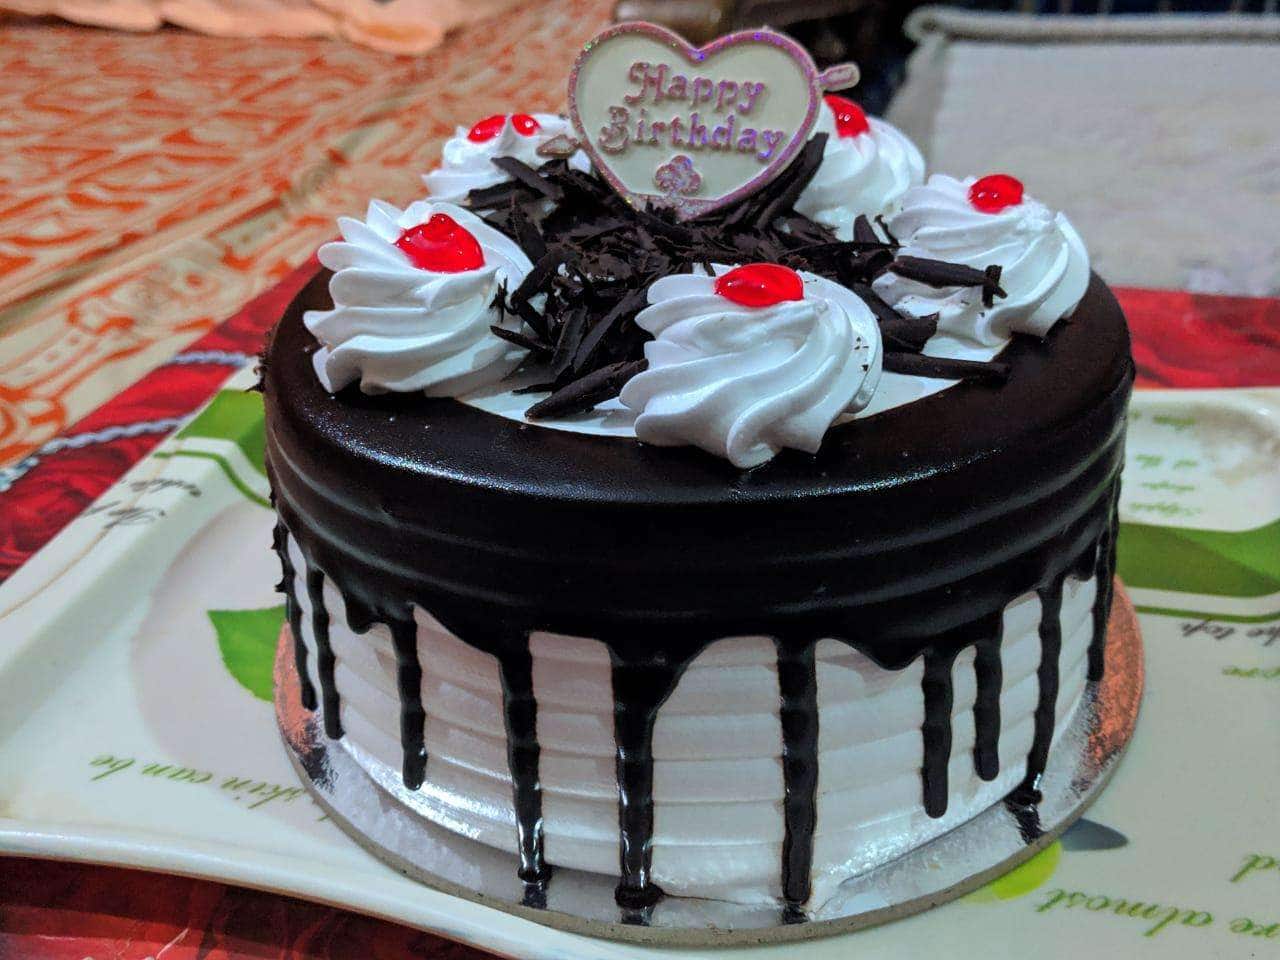 Ordered a cake with no message from Zomato : r/indiasocial